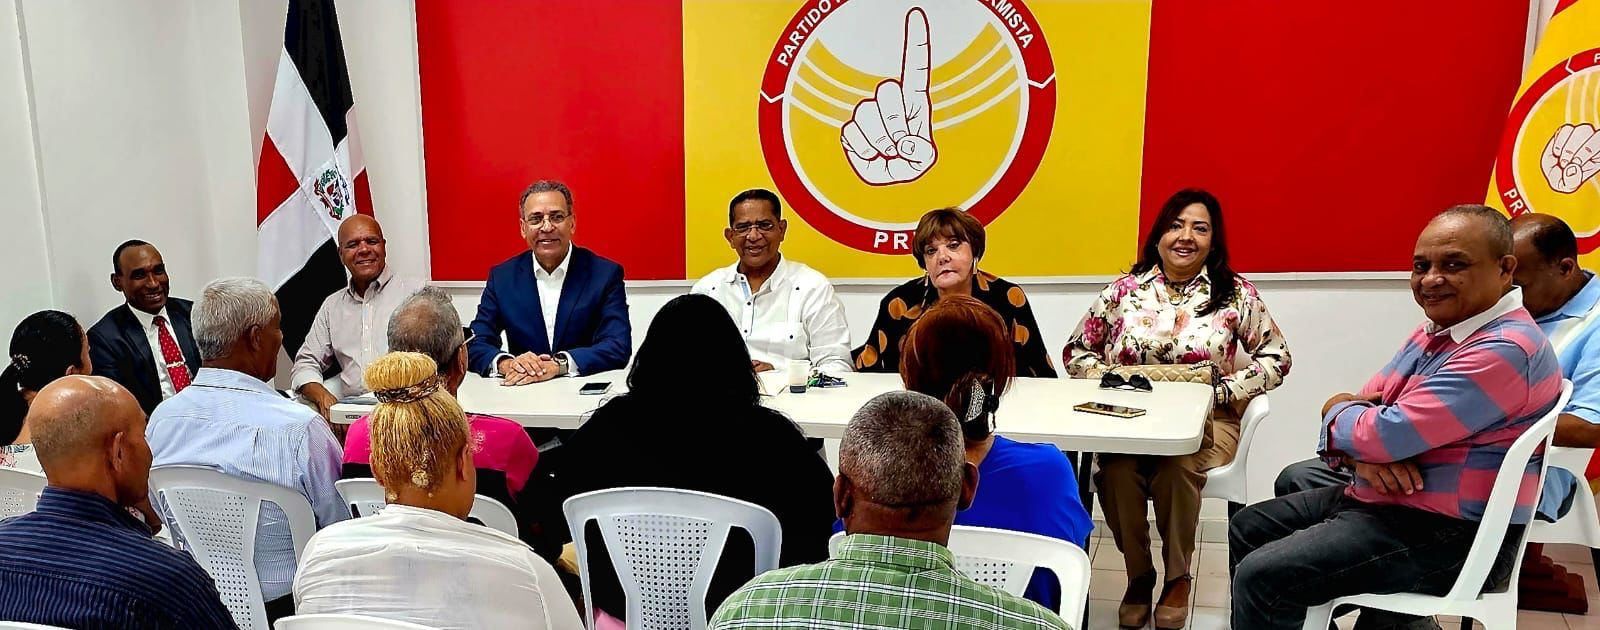 A new reformist group decides to participate as an ally in the elections |  AlMomento.net